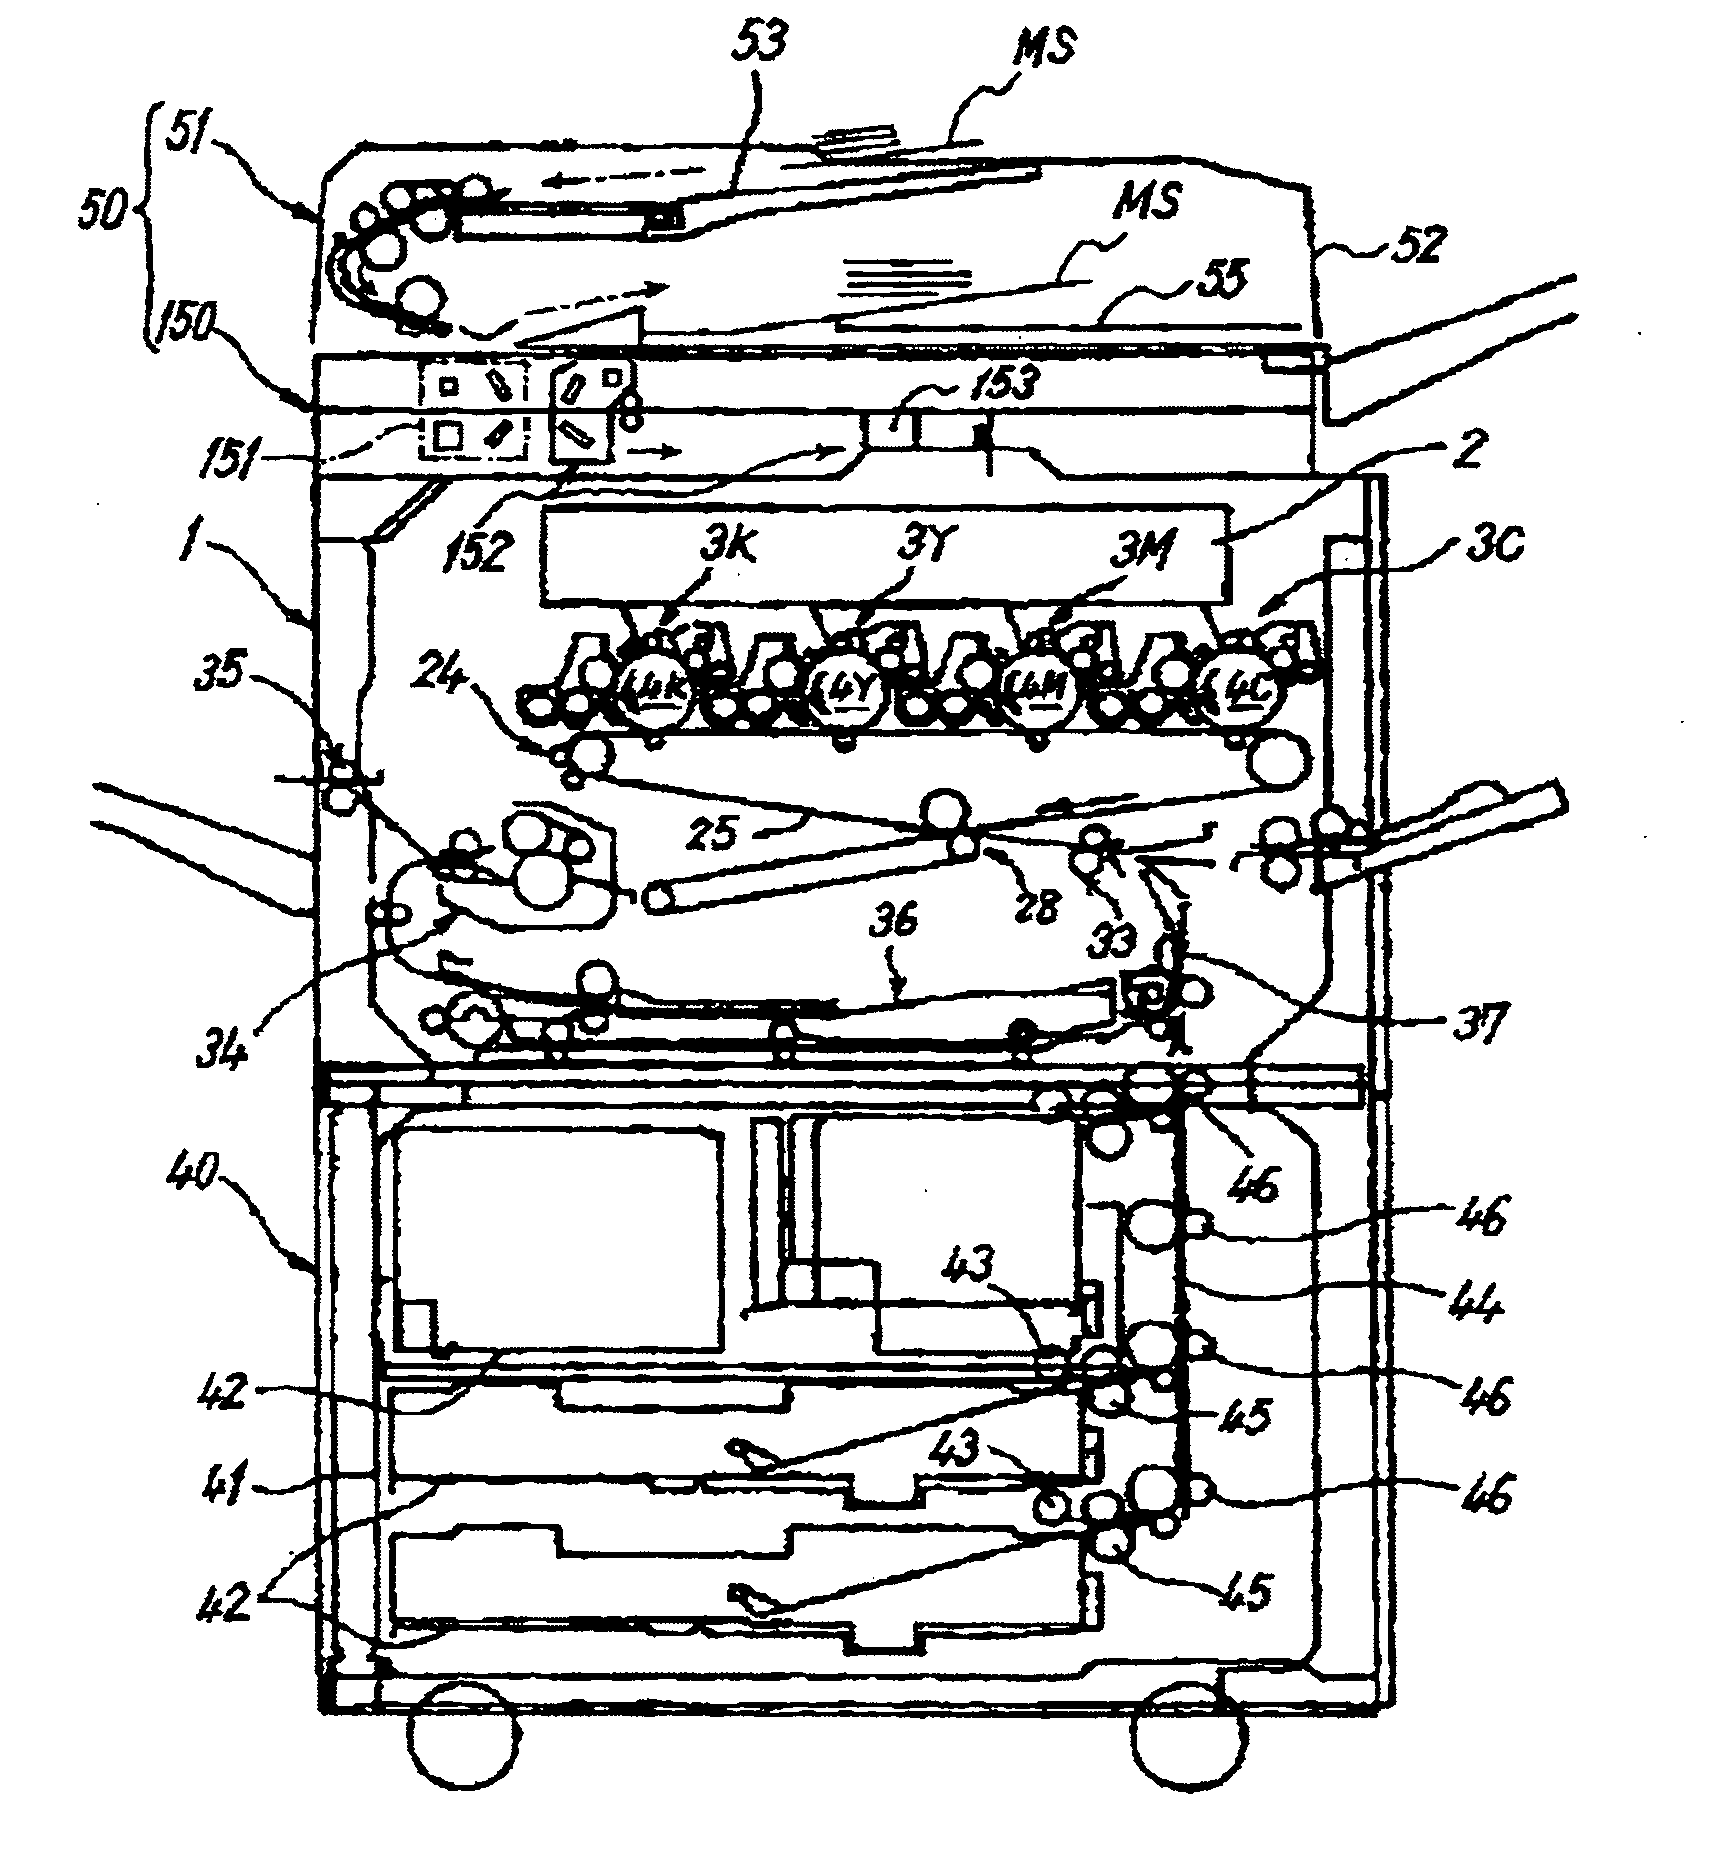 Image read device and copier